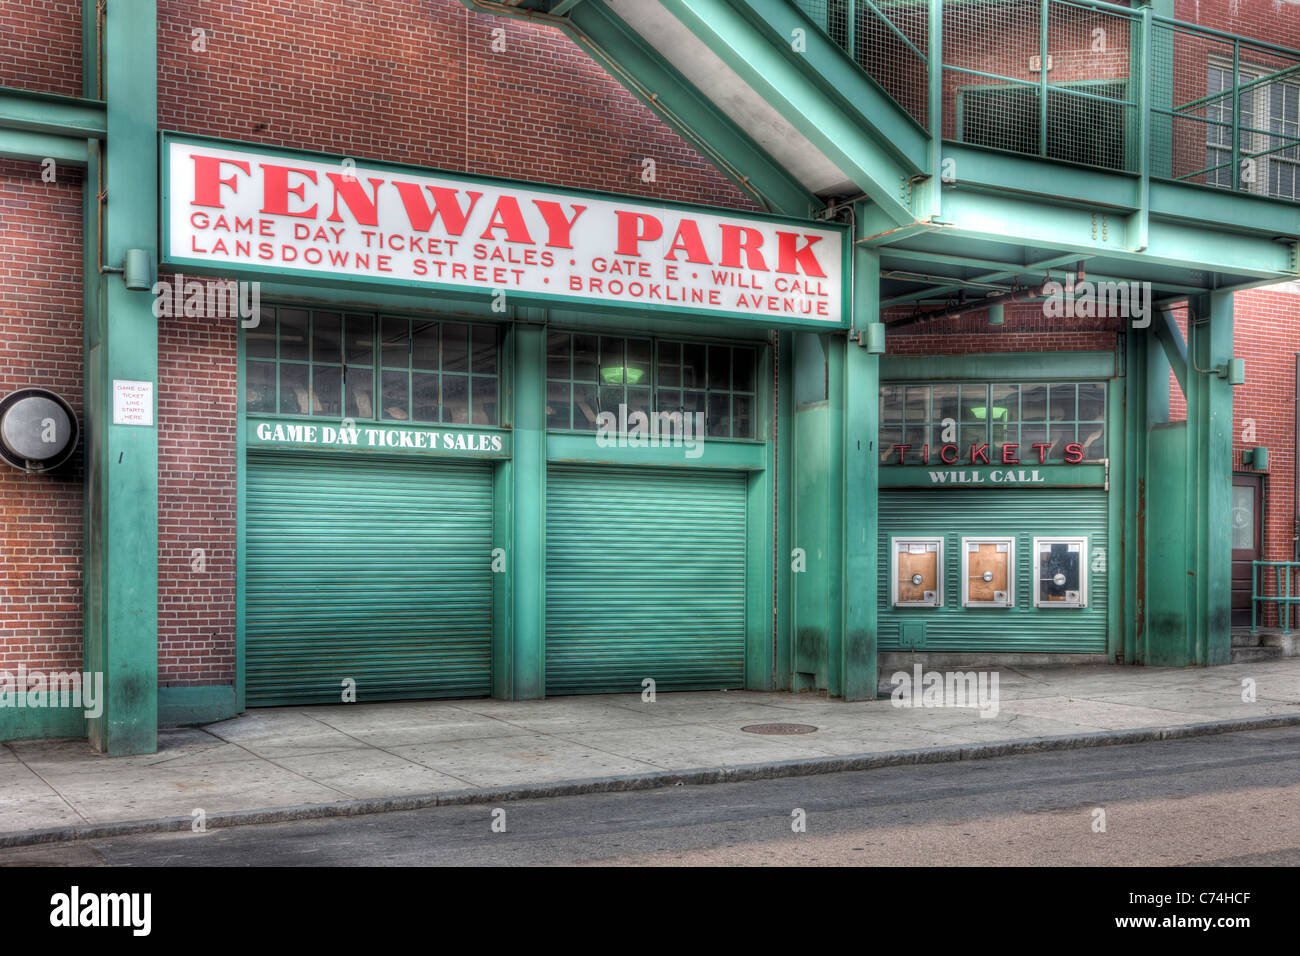 A view of historic Fenway Park in Boston, Massachusetts from just outside Gate E on Lansdowne street. Stock Photo